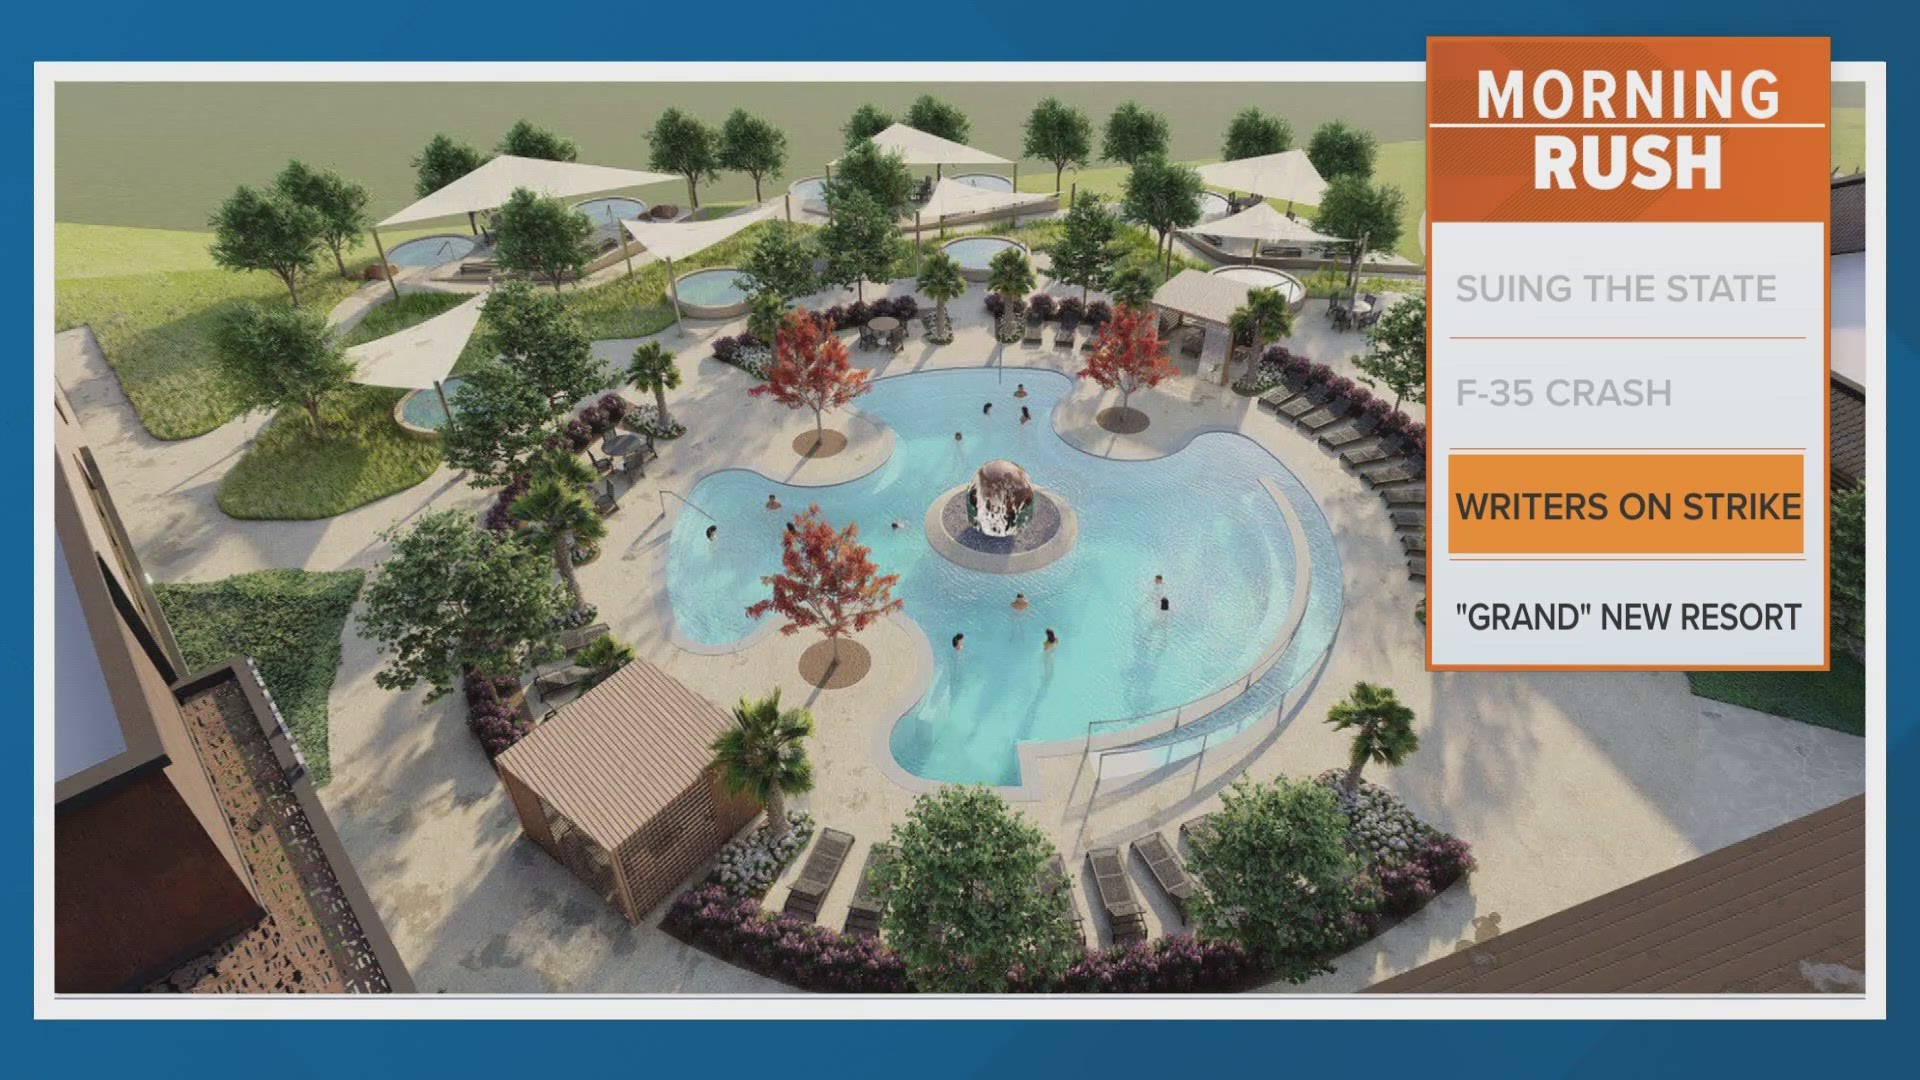 World Springs is planning a new resort in The Colony's Grandscape area.